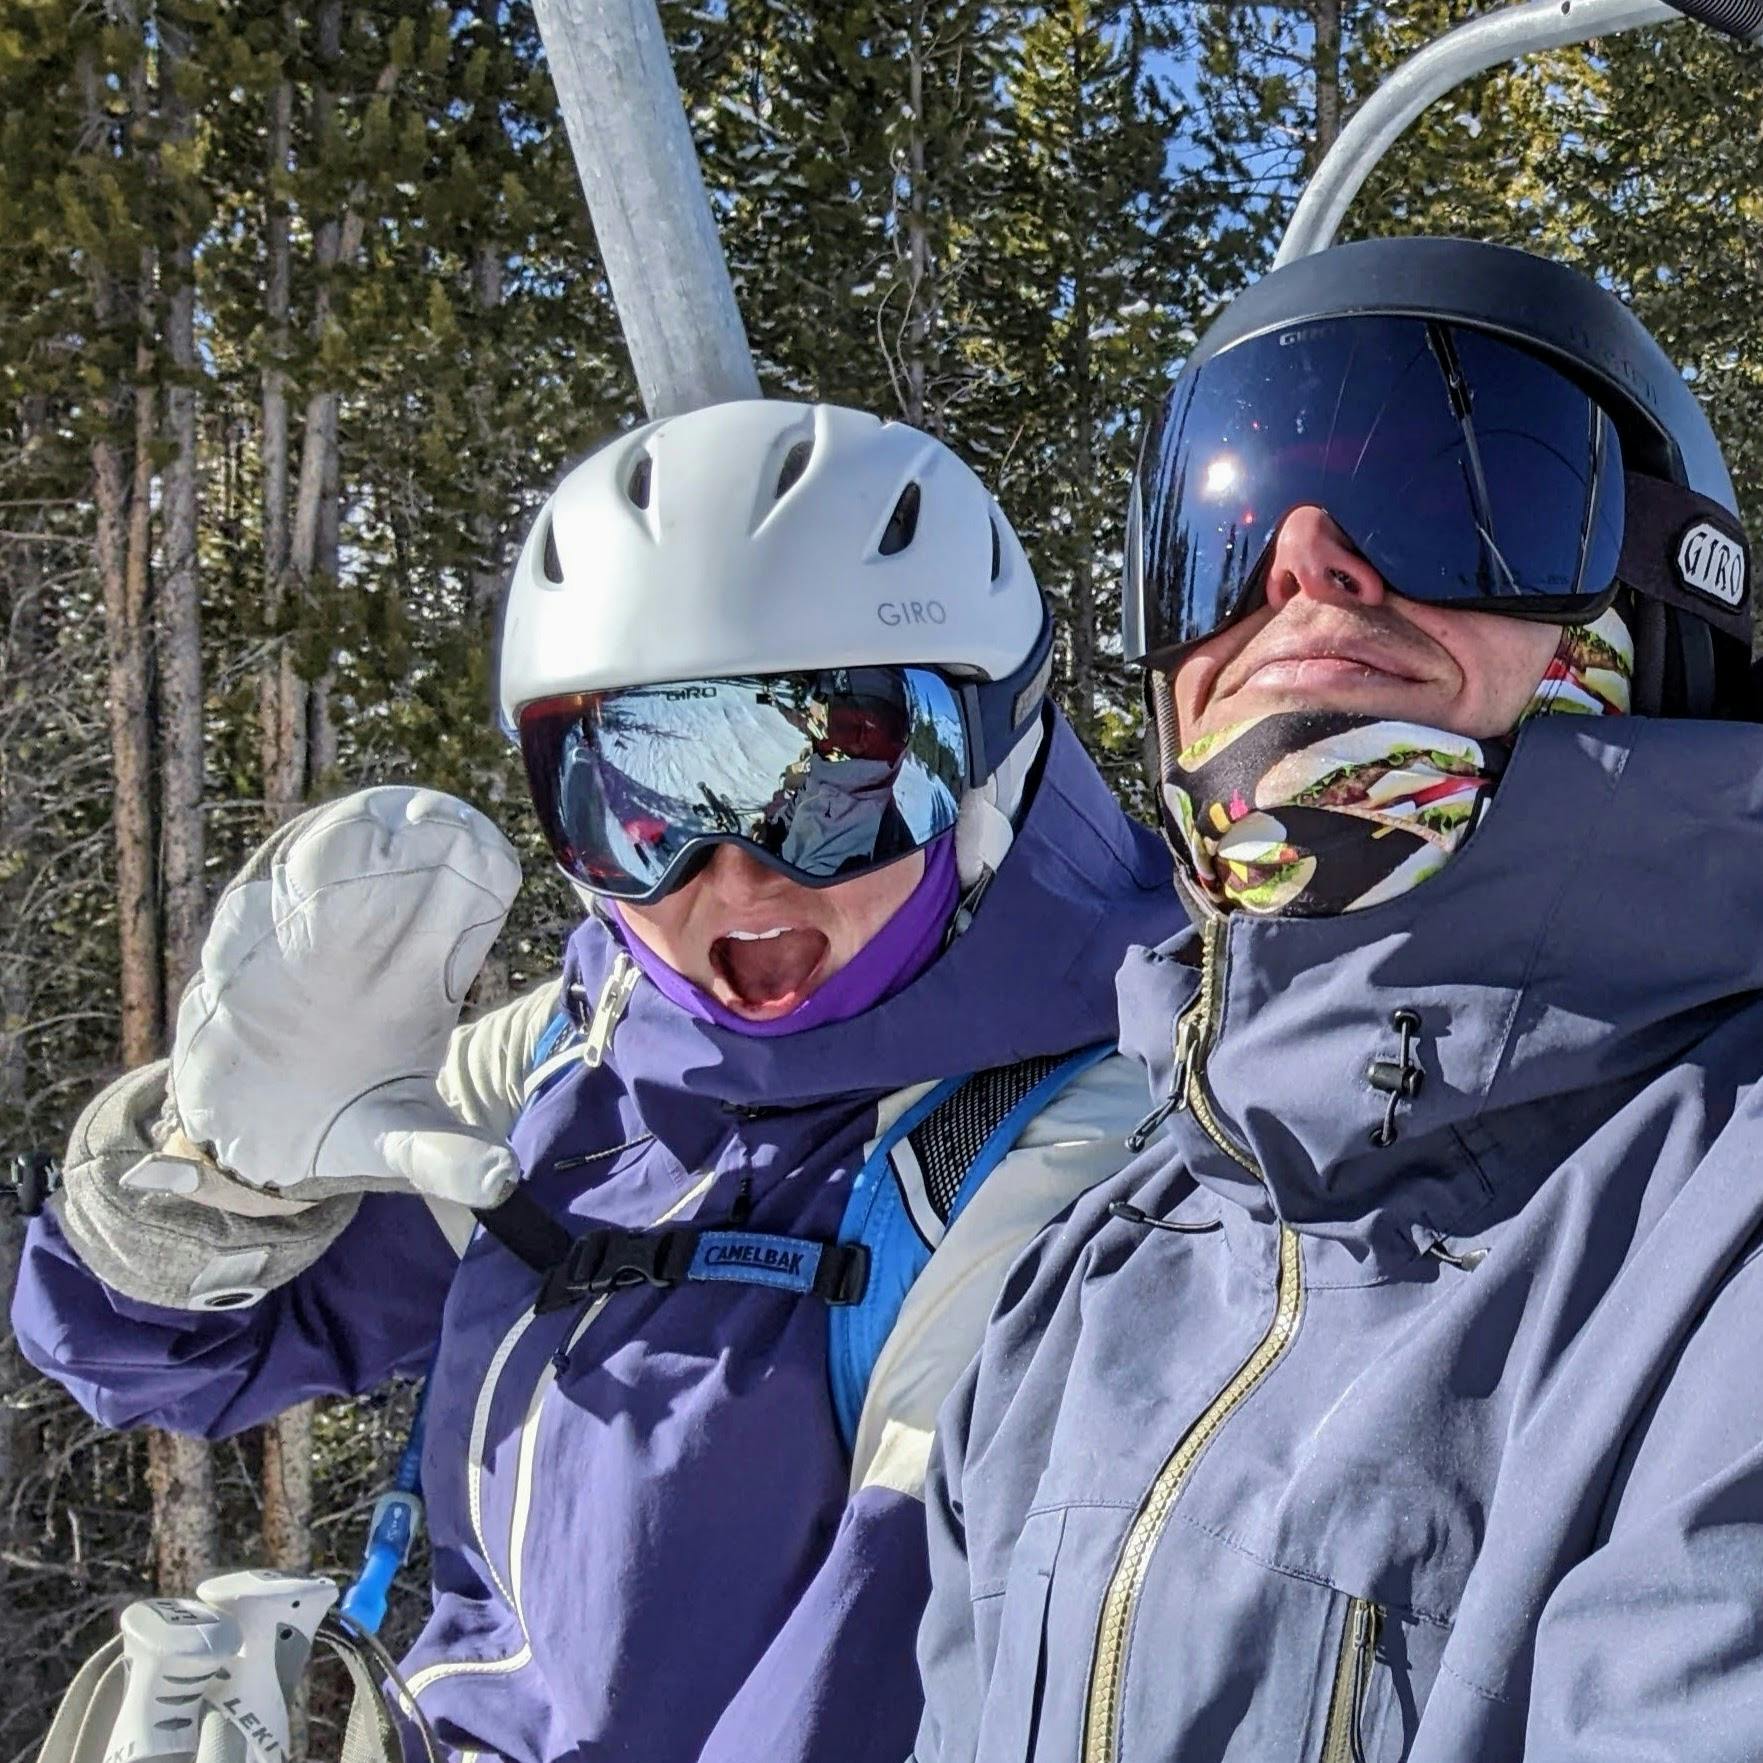 Two people in ski gear sitting on a chair lift.